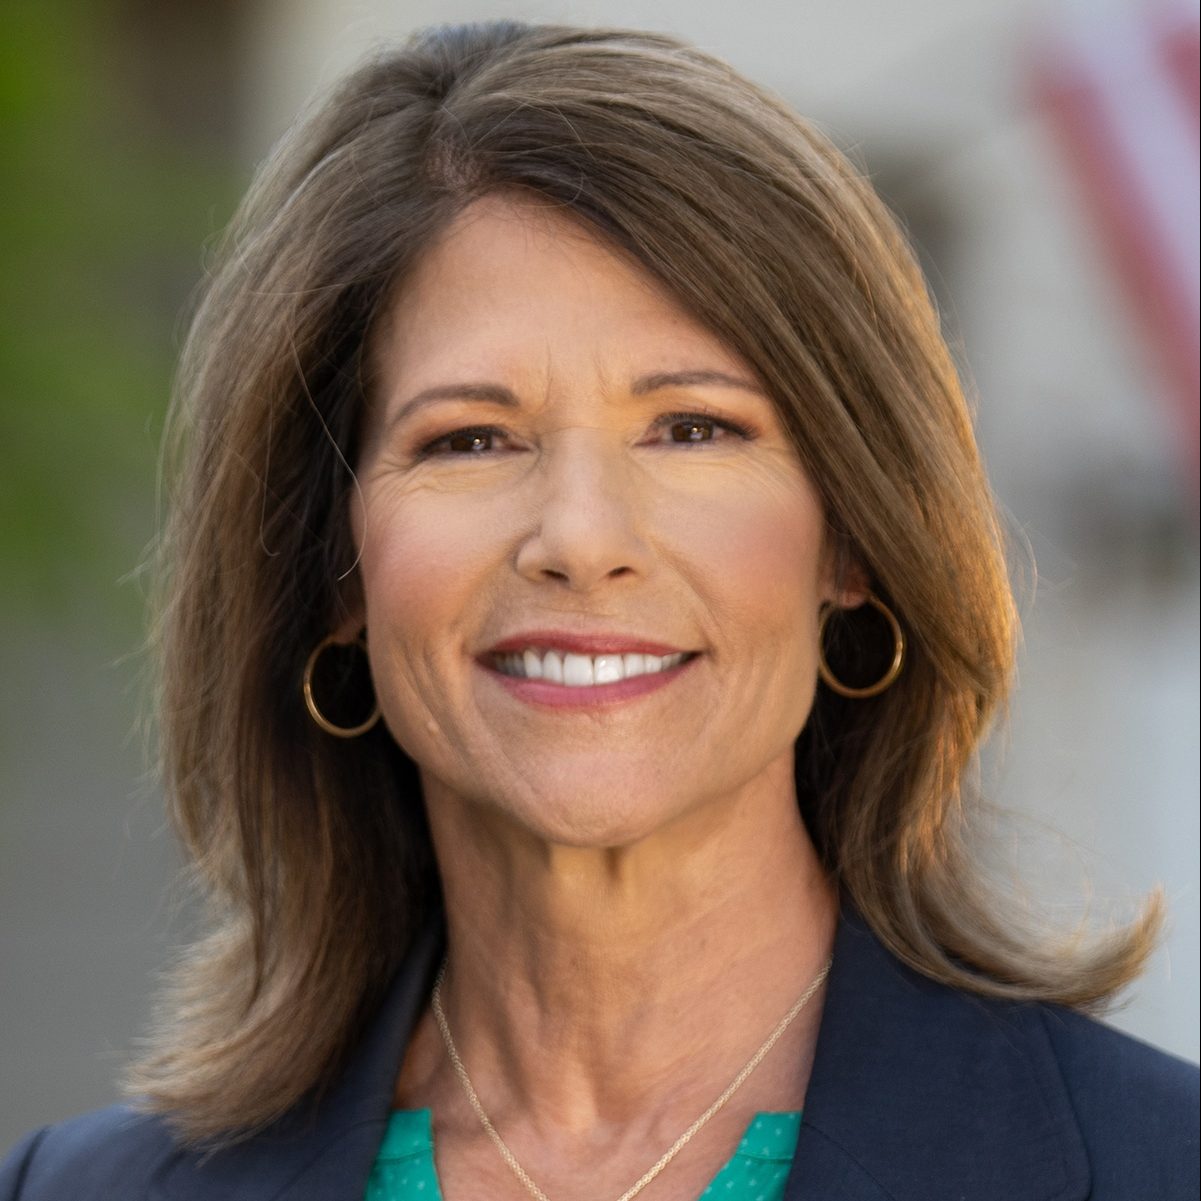 Bustos Compiles Advice for Defending House Majority in 2022